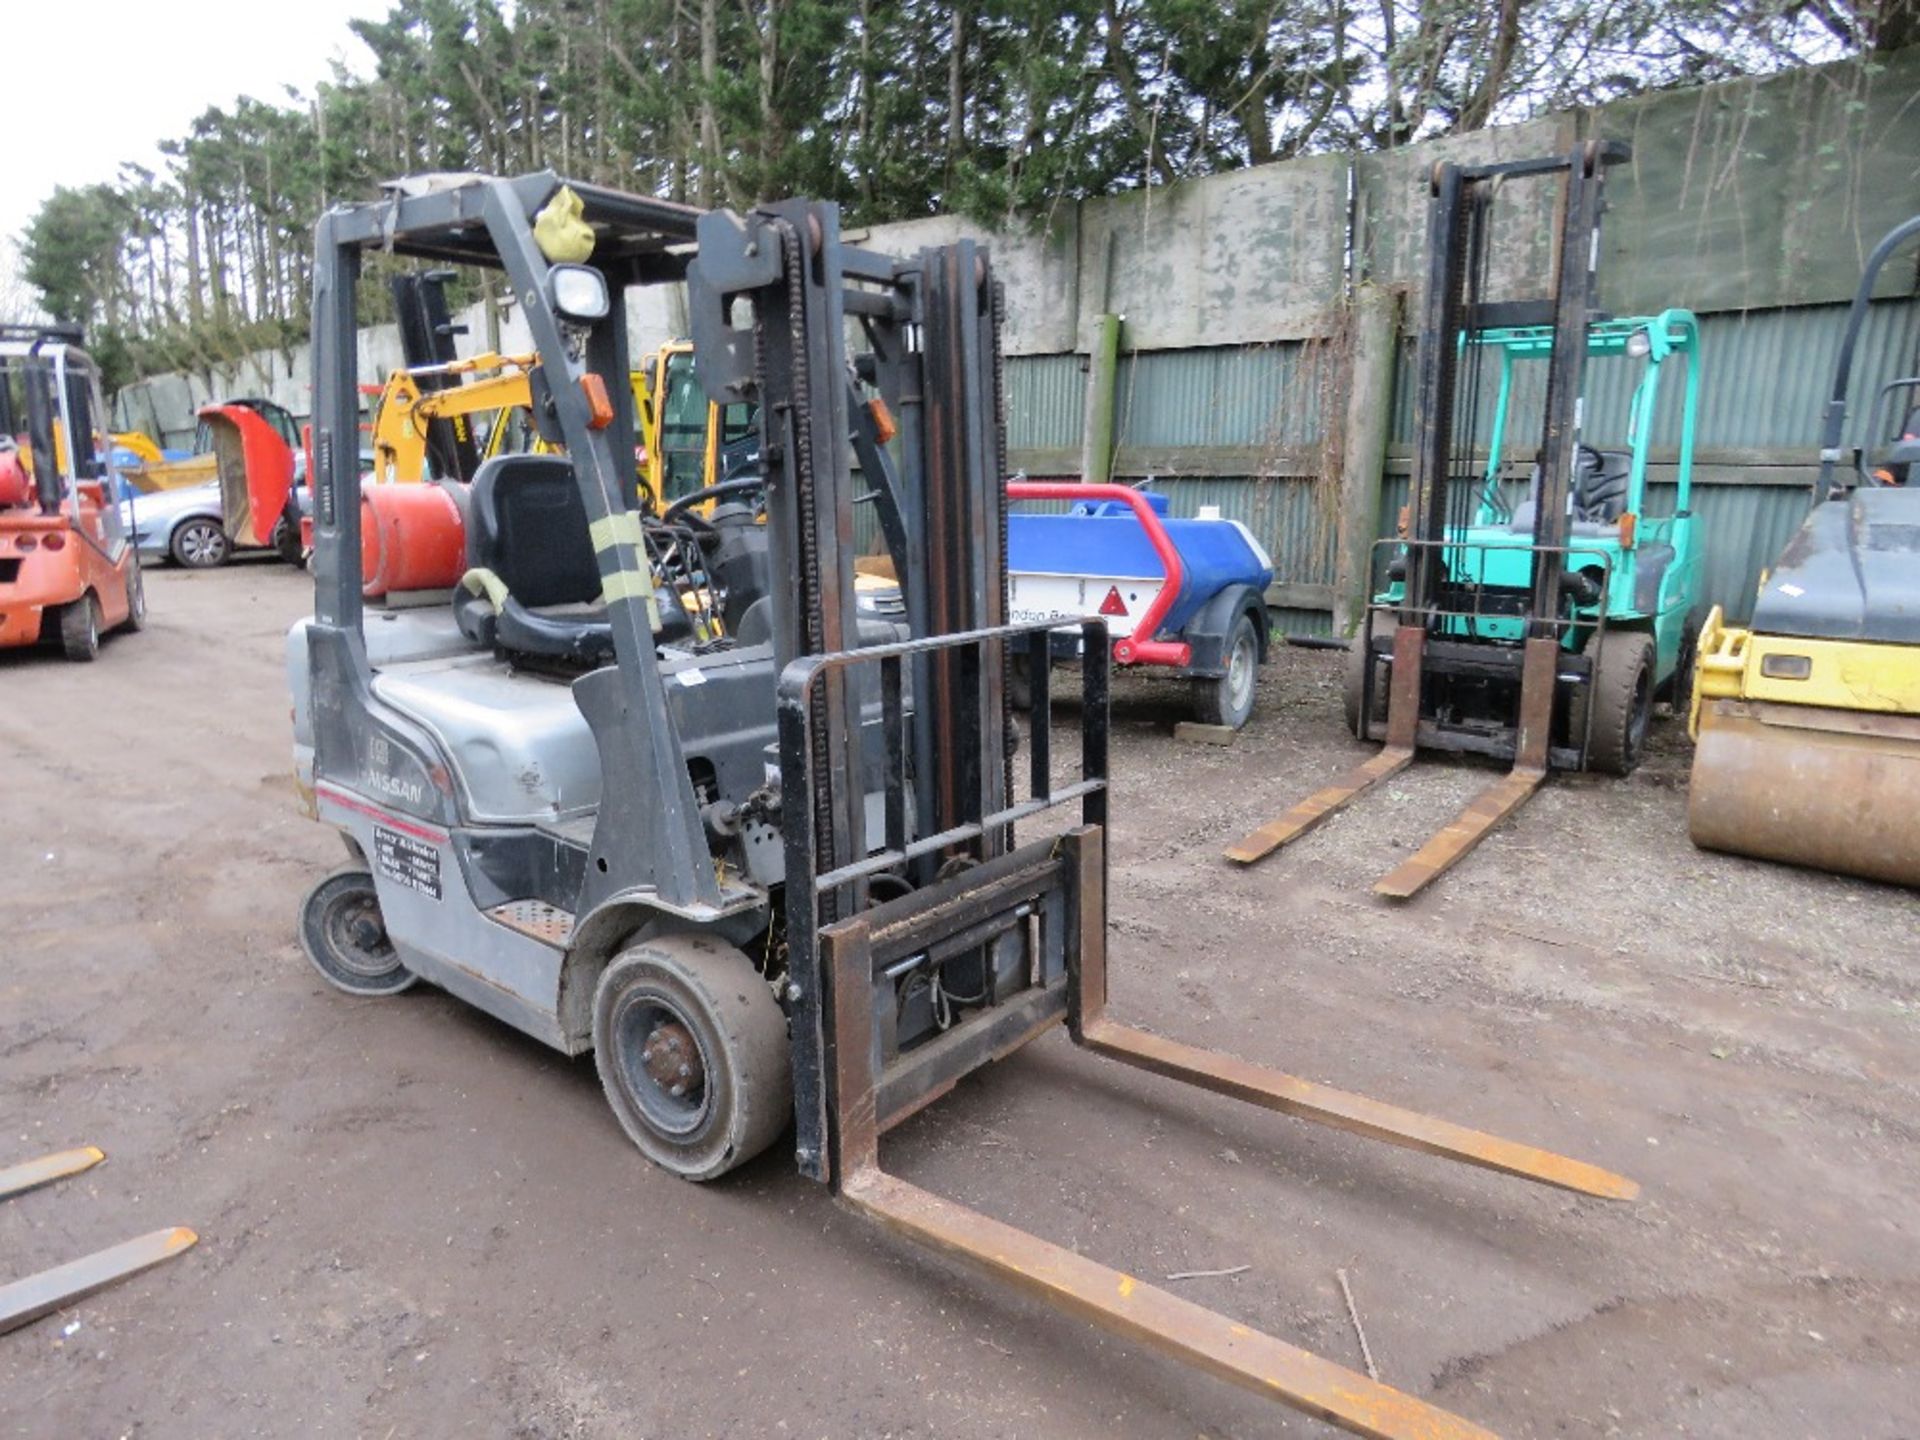 NISSAN 1.5TONNE CAPACITY GAS POWERED FORKLIFT TRUCK SN:L01-000622, 3260 REC HOURS. LOW MAST HEIGHT. - Image 3 of 10